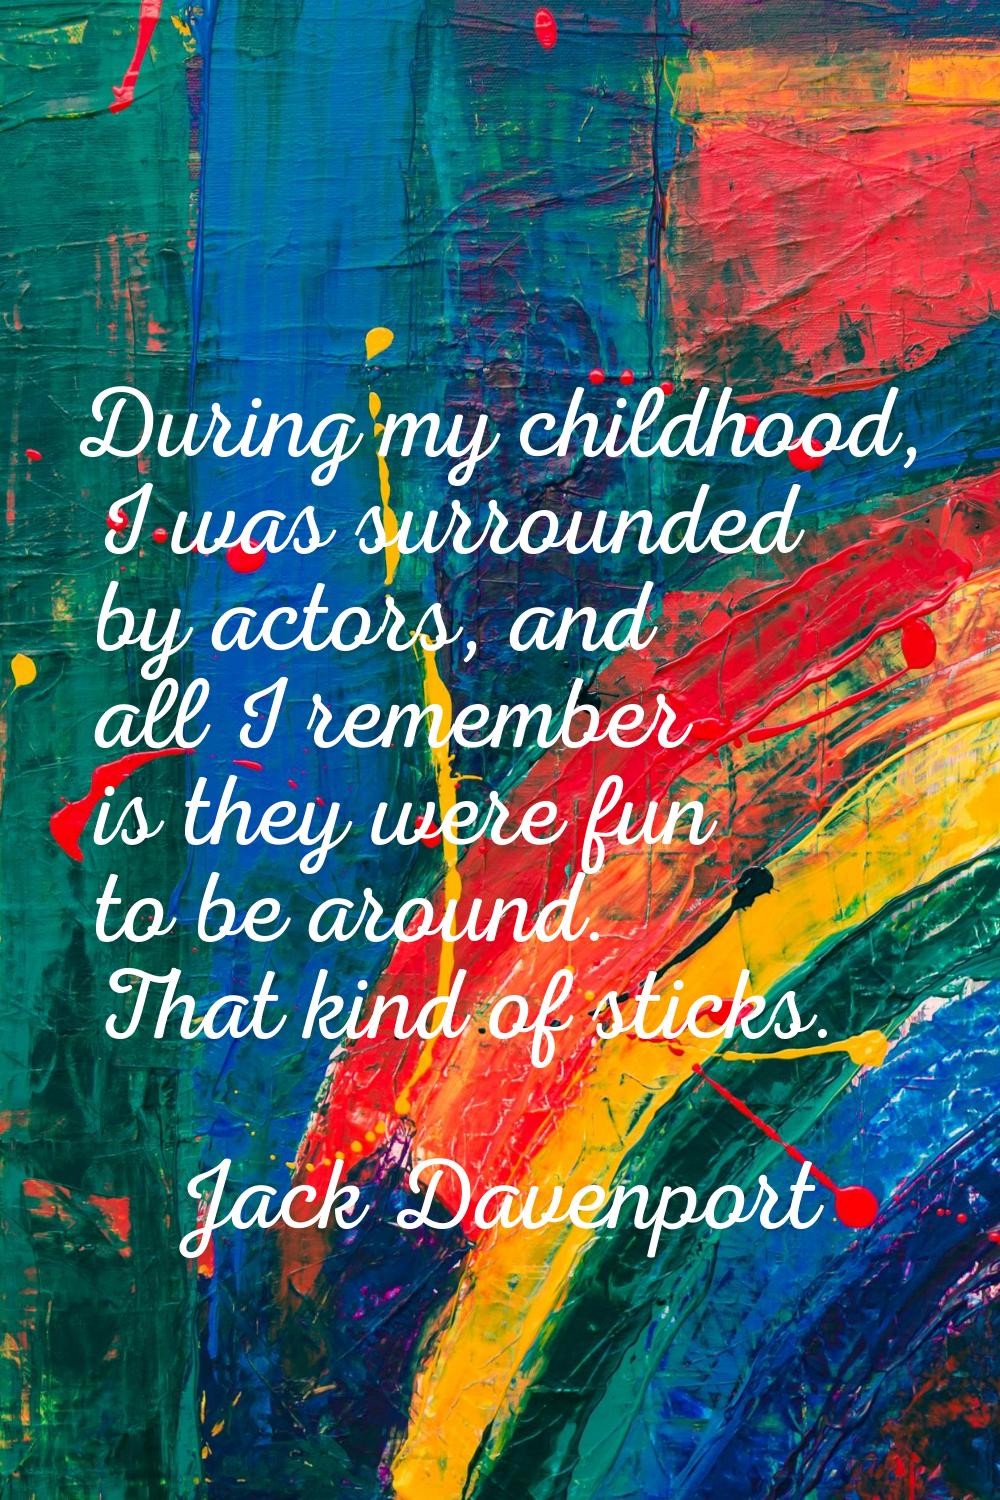 During my childhood, I was surrounded by actors, and all I remember is they were fun to be around. 